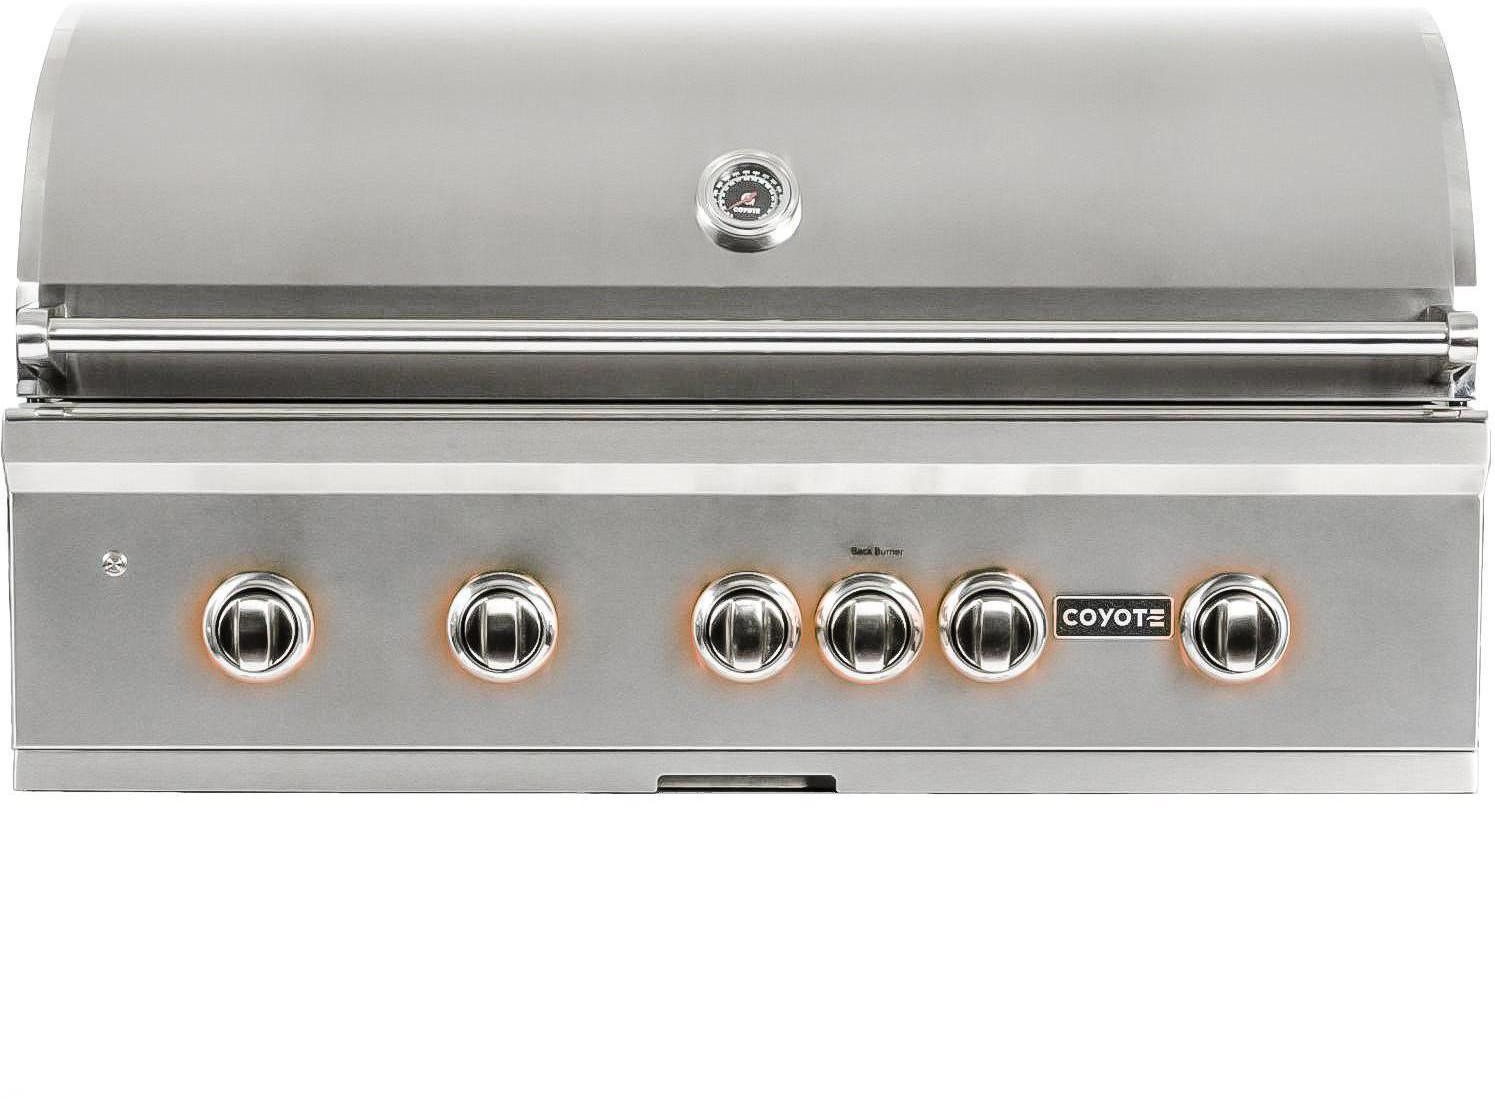 Coyote S-Series Barbecue Grill PRO42SRNG